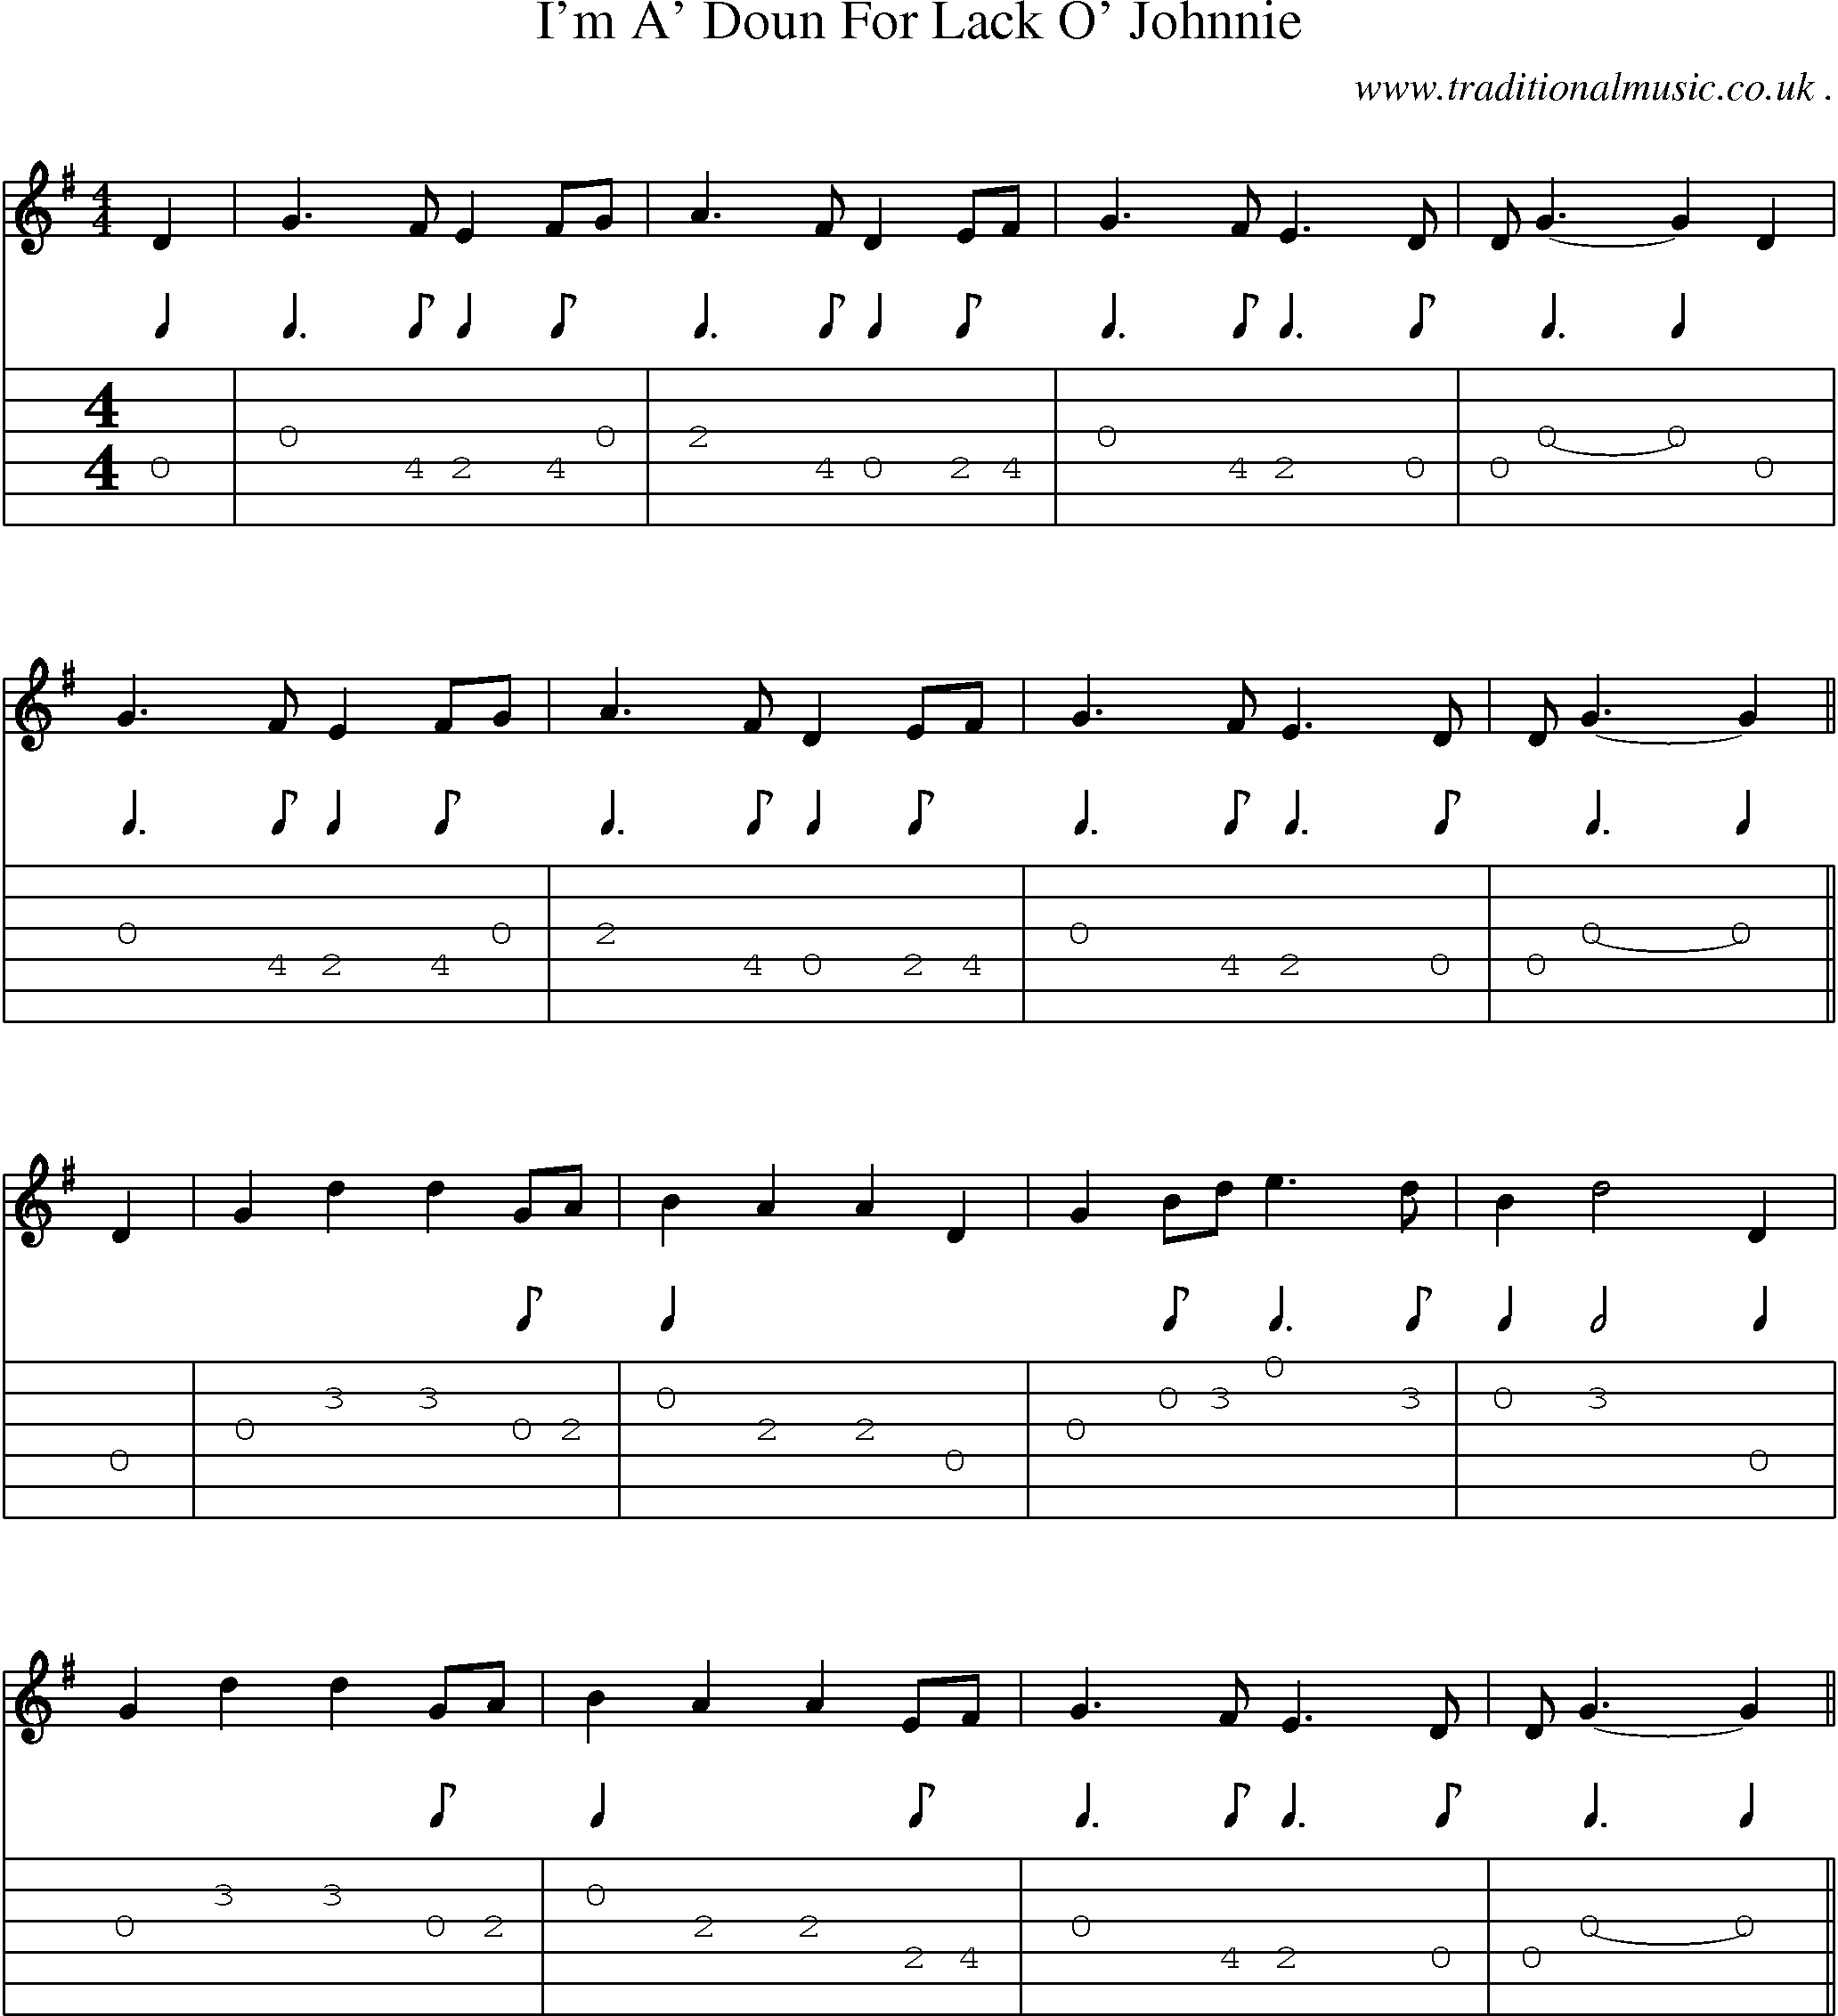 Sheet-Music and Guitar Tabs for Im A Doun For Lack O Johnnie